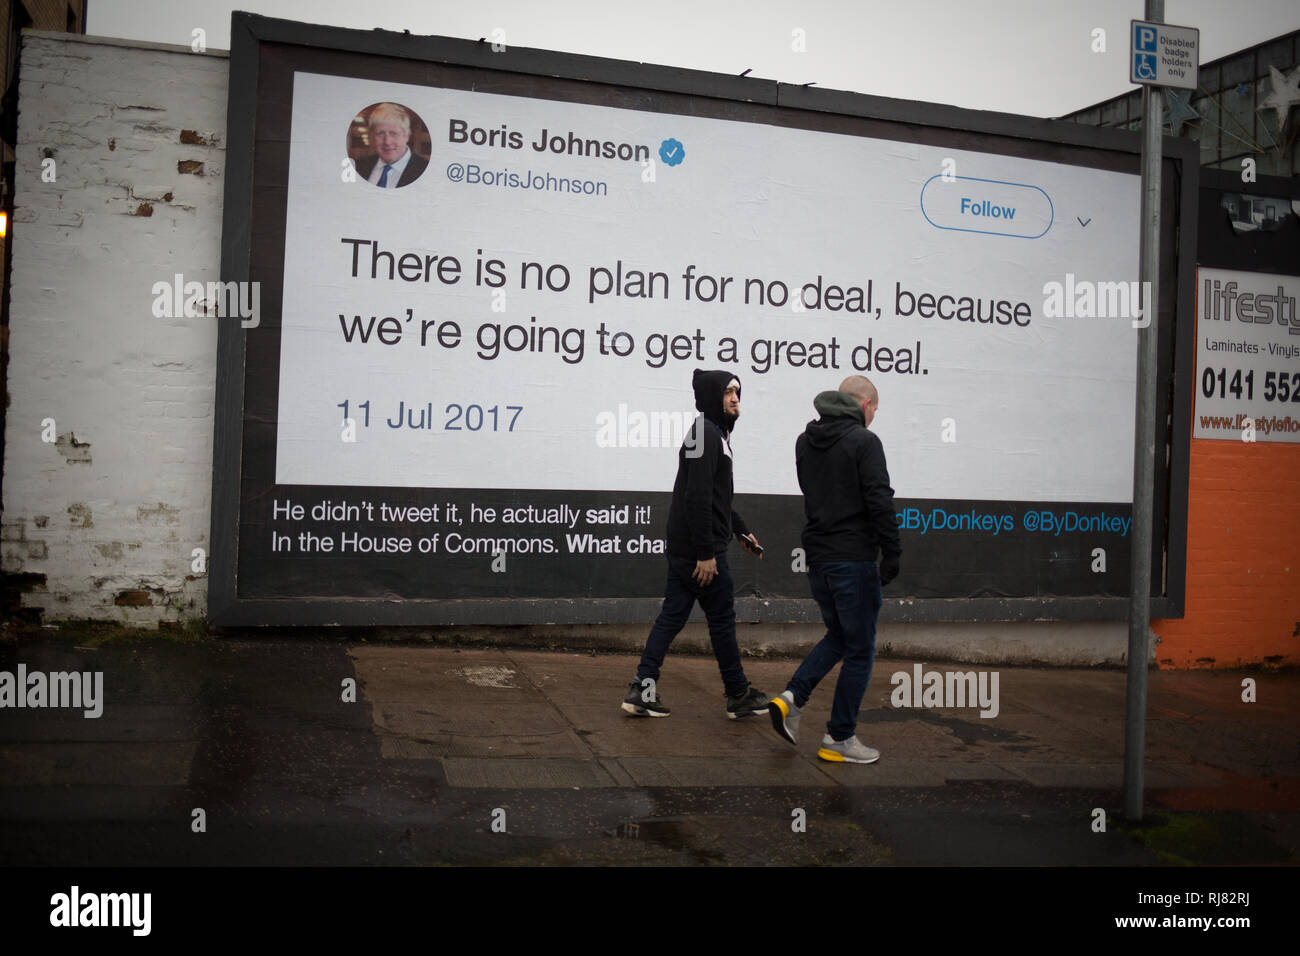 Glasgow, Scotland, 5th February 2019. Billboard by the anti-Brexit group 'Led By Donkeys', showing a quote from Conservative Party MP Boris Johnson in which he talks of the great deal Great Britain would get on leaving the EU, in the East End of Glasgow, Scotland, 5 February 2019. The guerilla billboard campaign is the initiative of six friends who crowdfunded money to be able to post what they believe are the 'country's biggest lies'.  Image Credit: Jeremy Sutton-Hibbert/Alamy Live News. Stock Photo